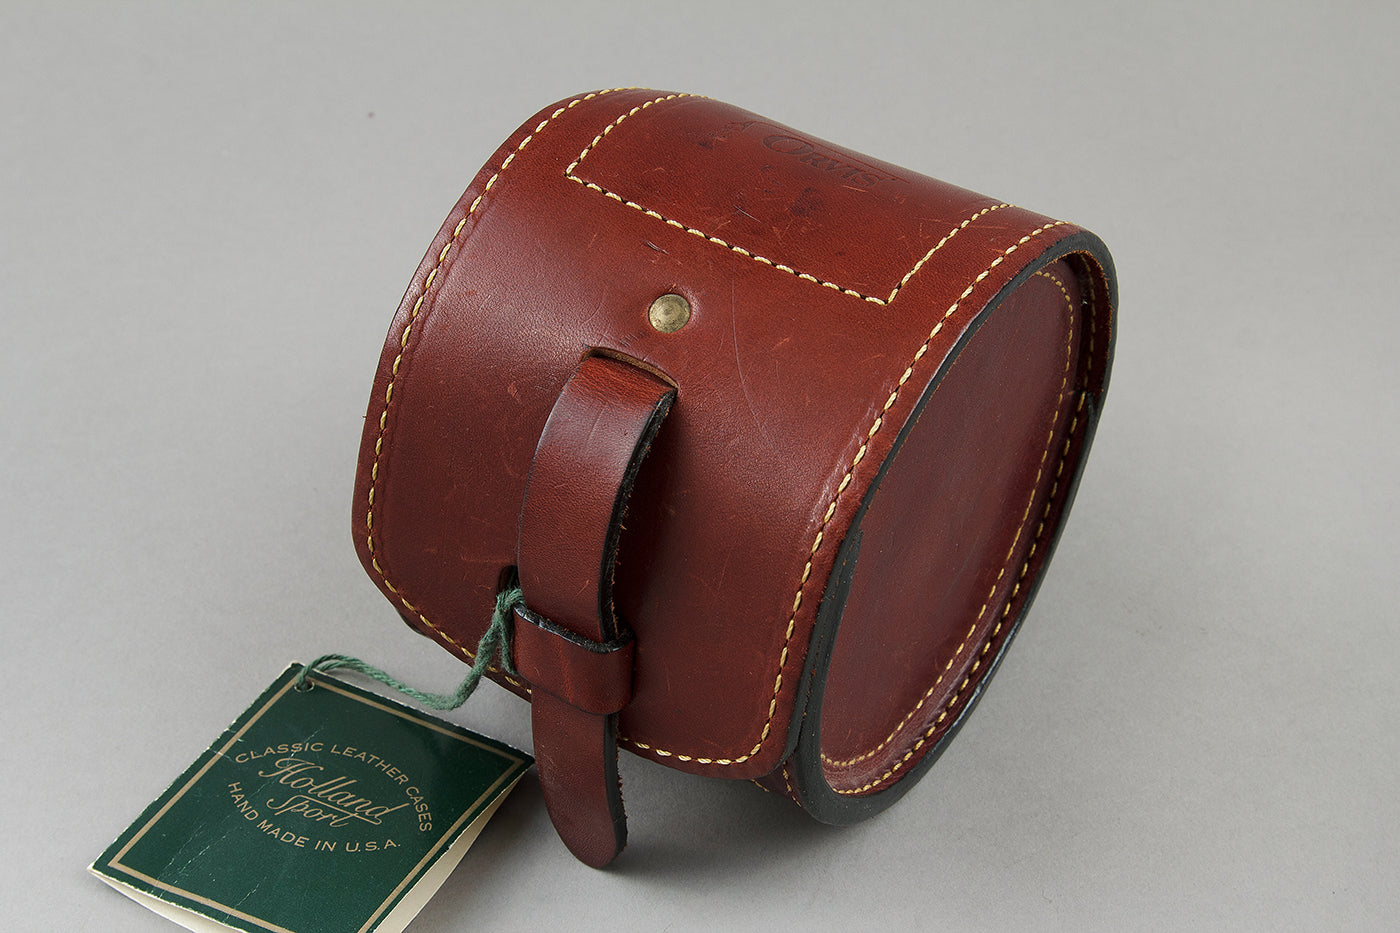 Orvis & Holland – Leather Reel Case 4 1/2